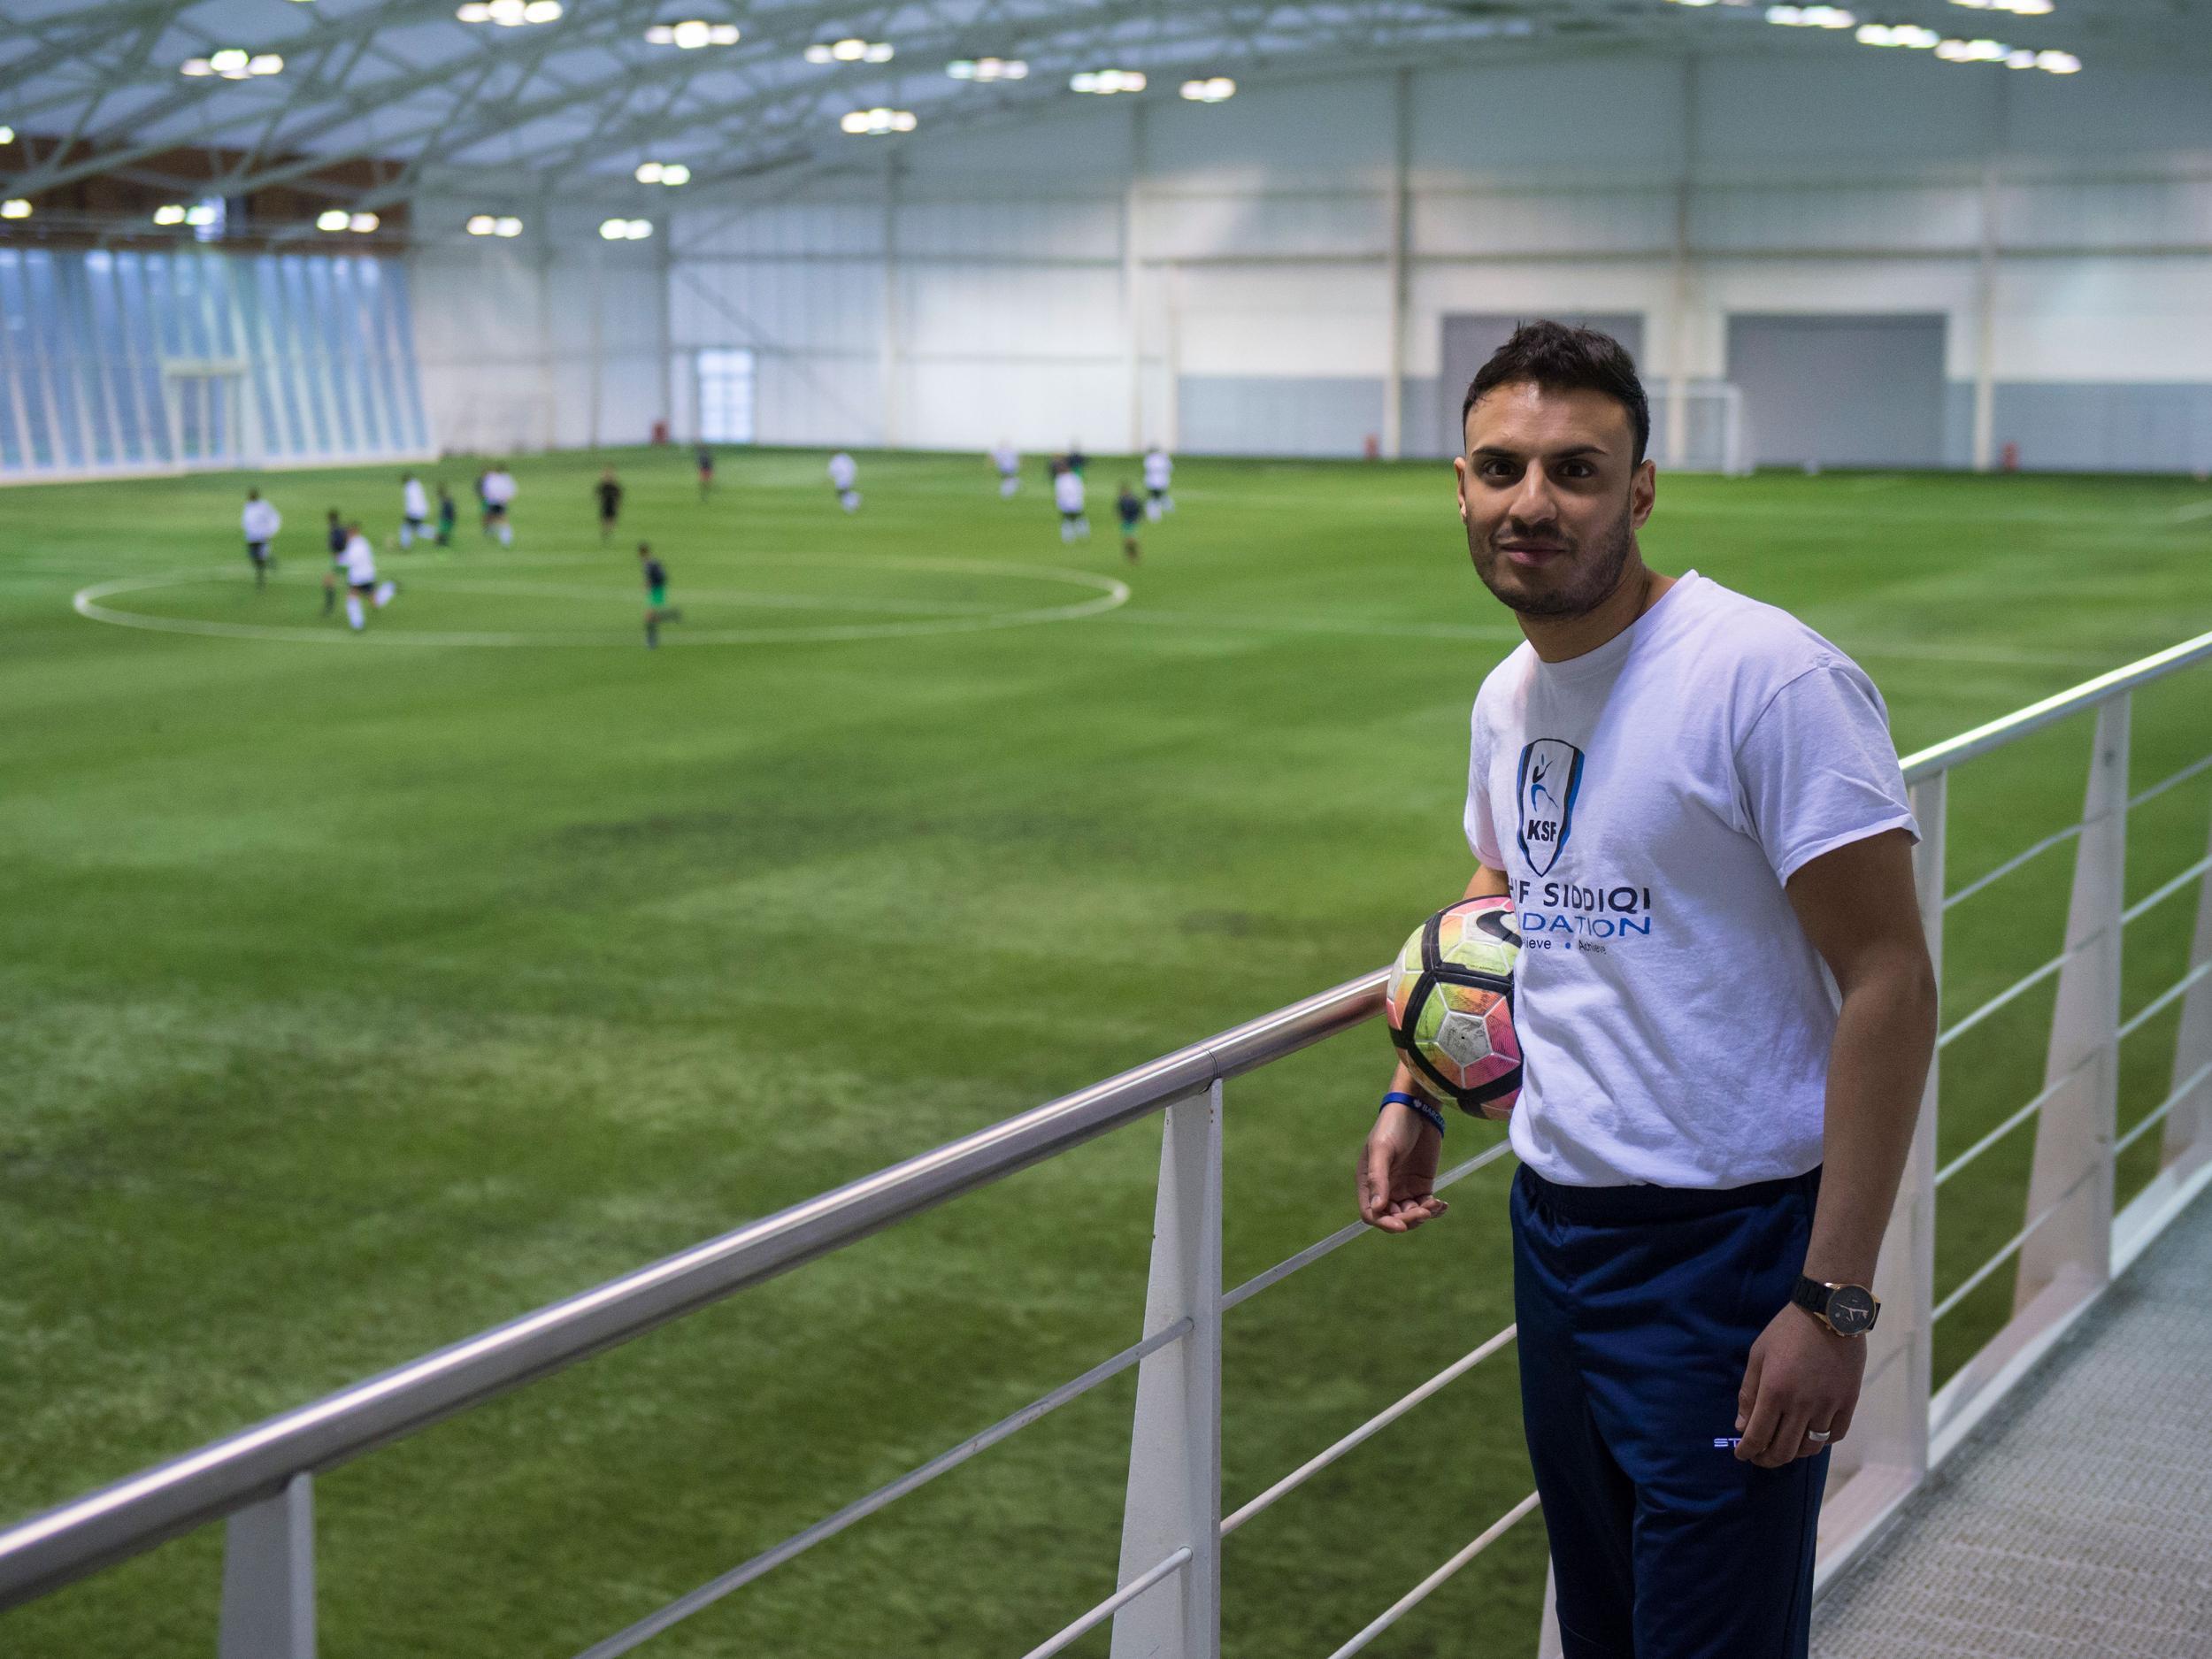 Siddiqi is working to break down the barriers for young players